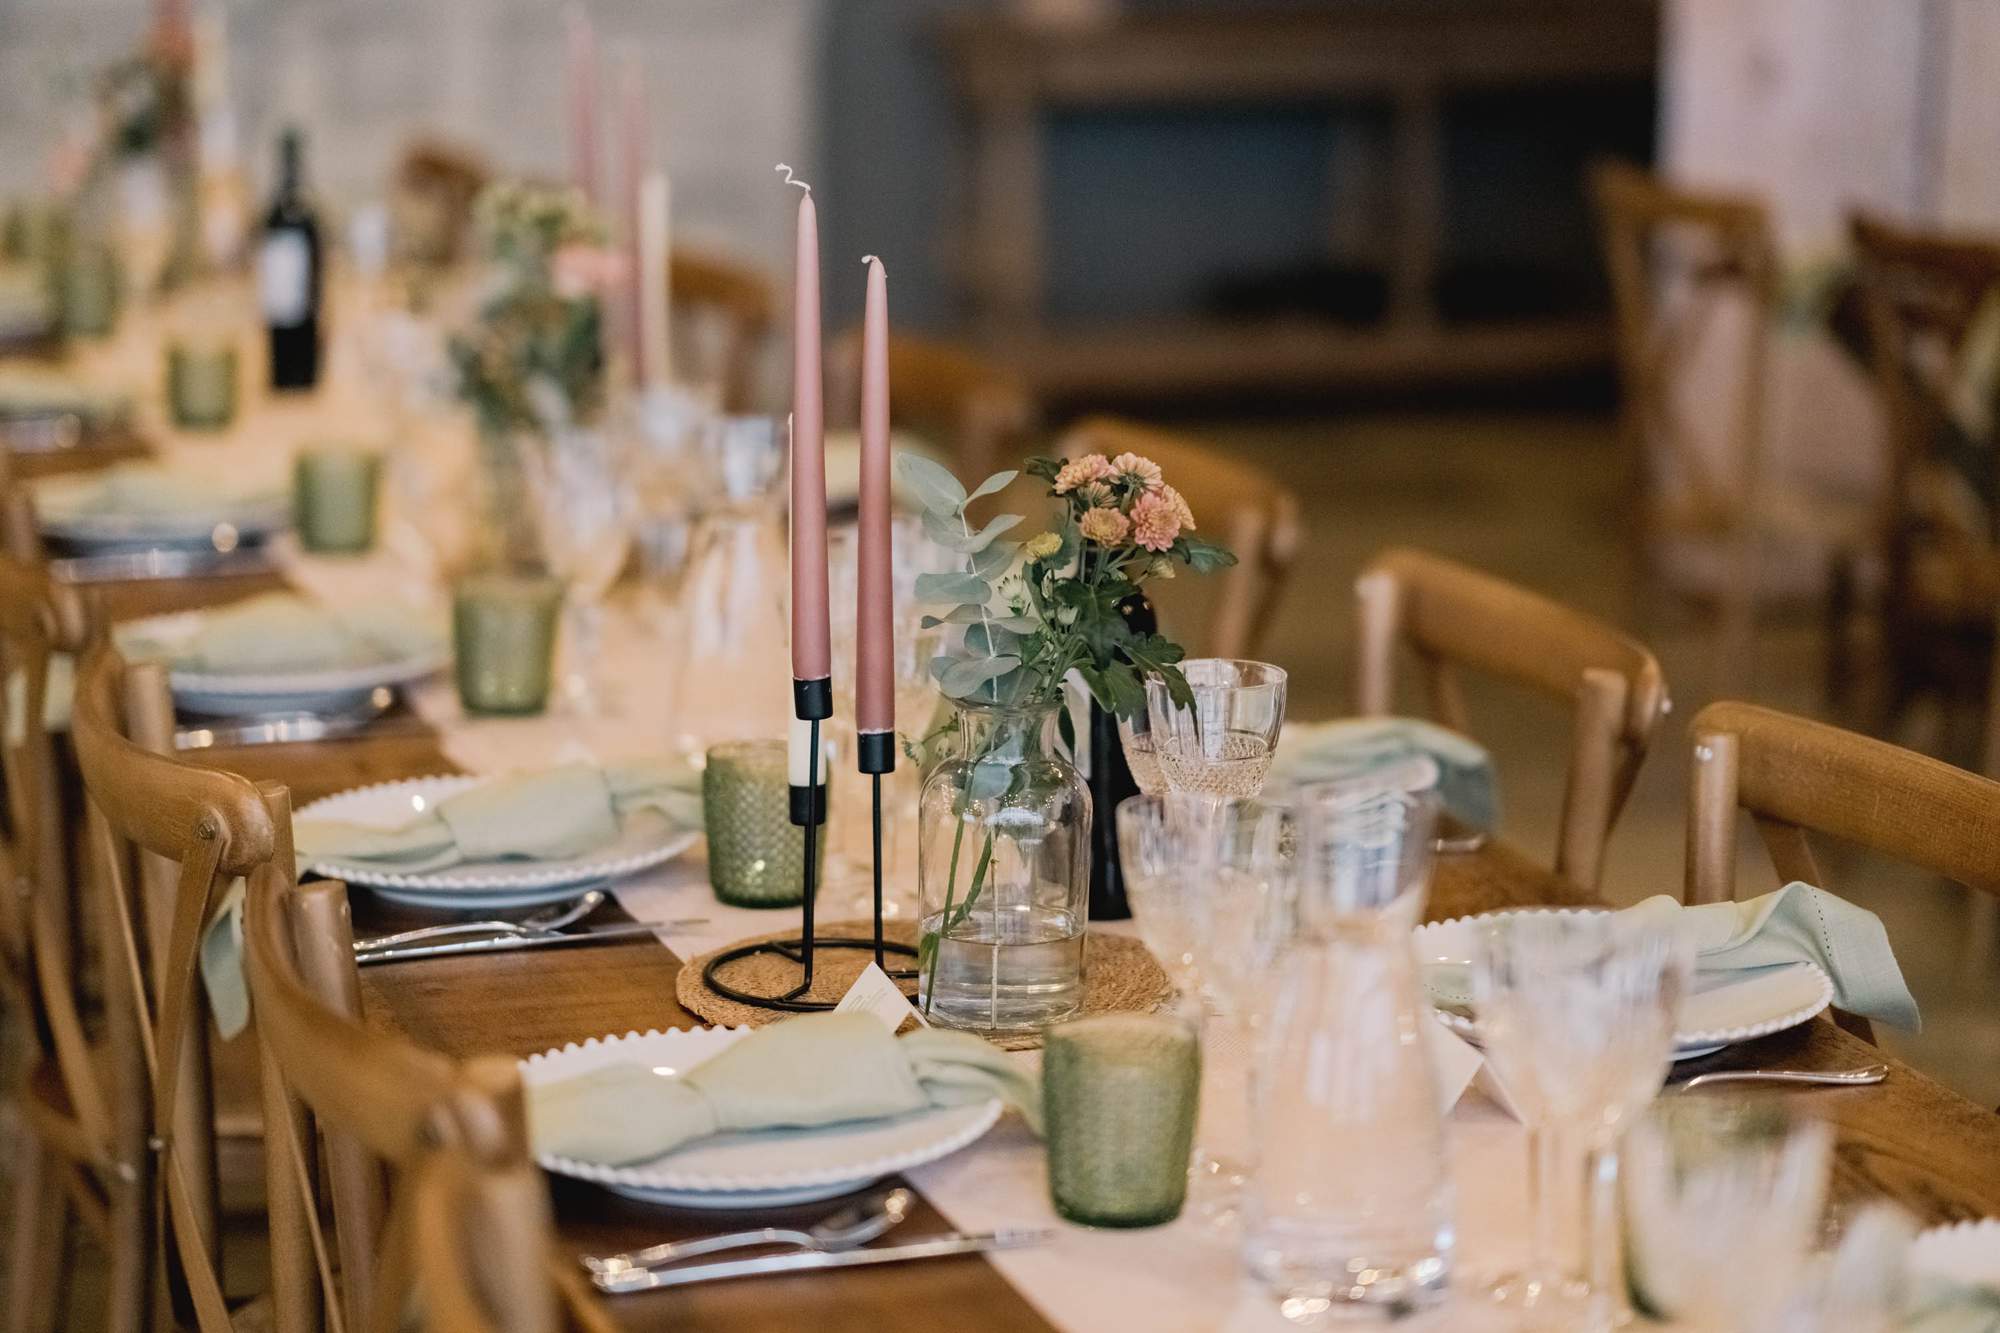 Wedding breakfast tables and details at the Barn at Botley Hill wedding venue in the heart of the Surrey countryside.